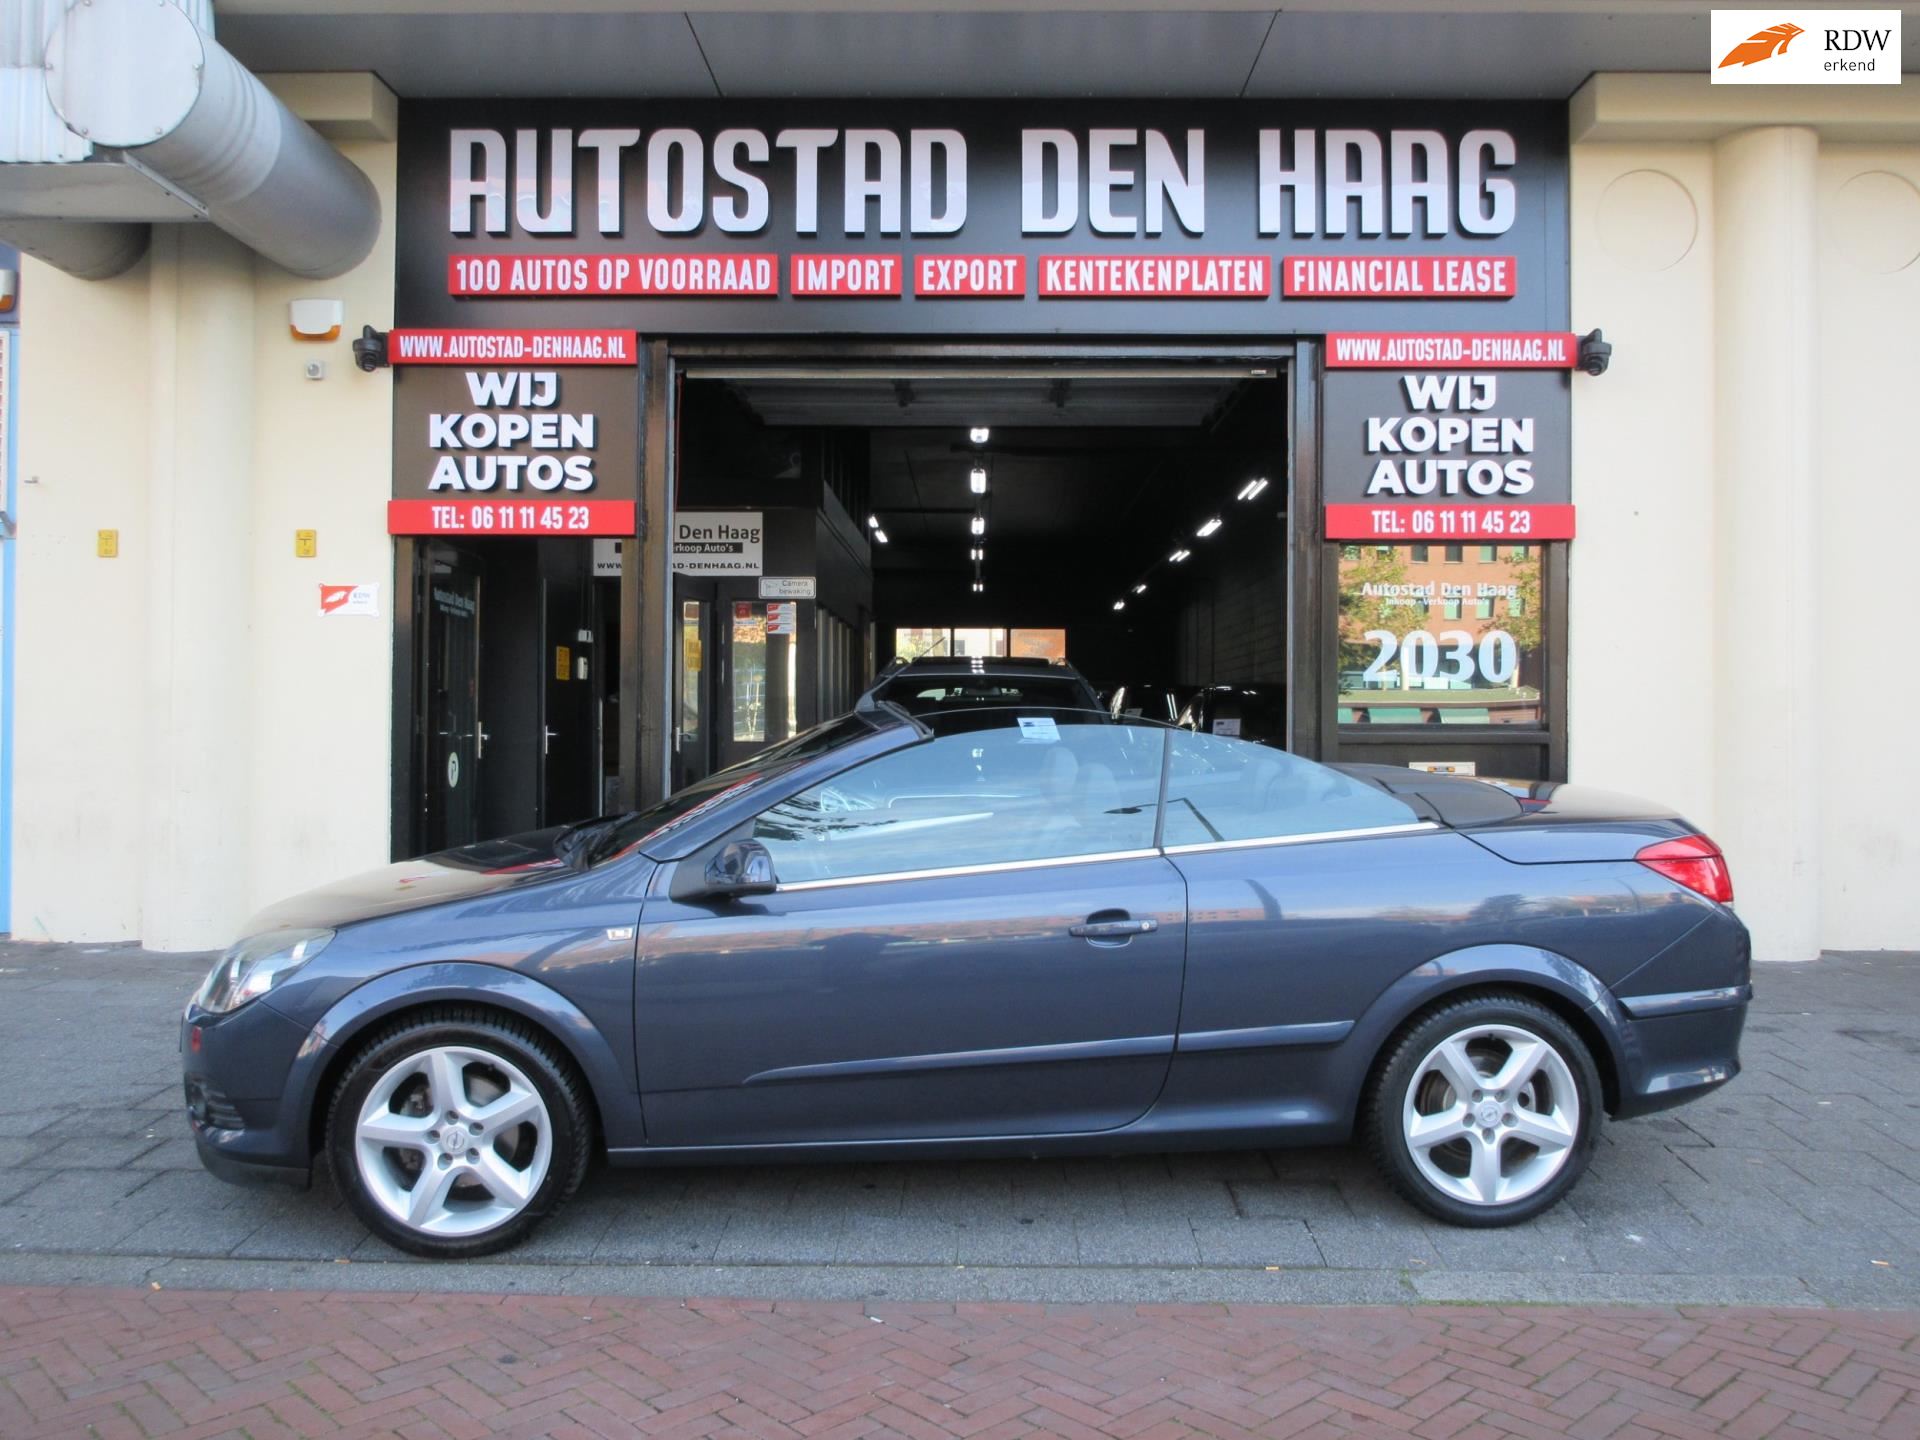 Opel Astra TwinTop occasion - Autostad Den Haag